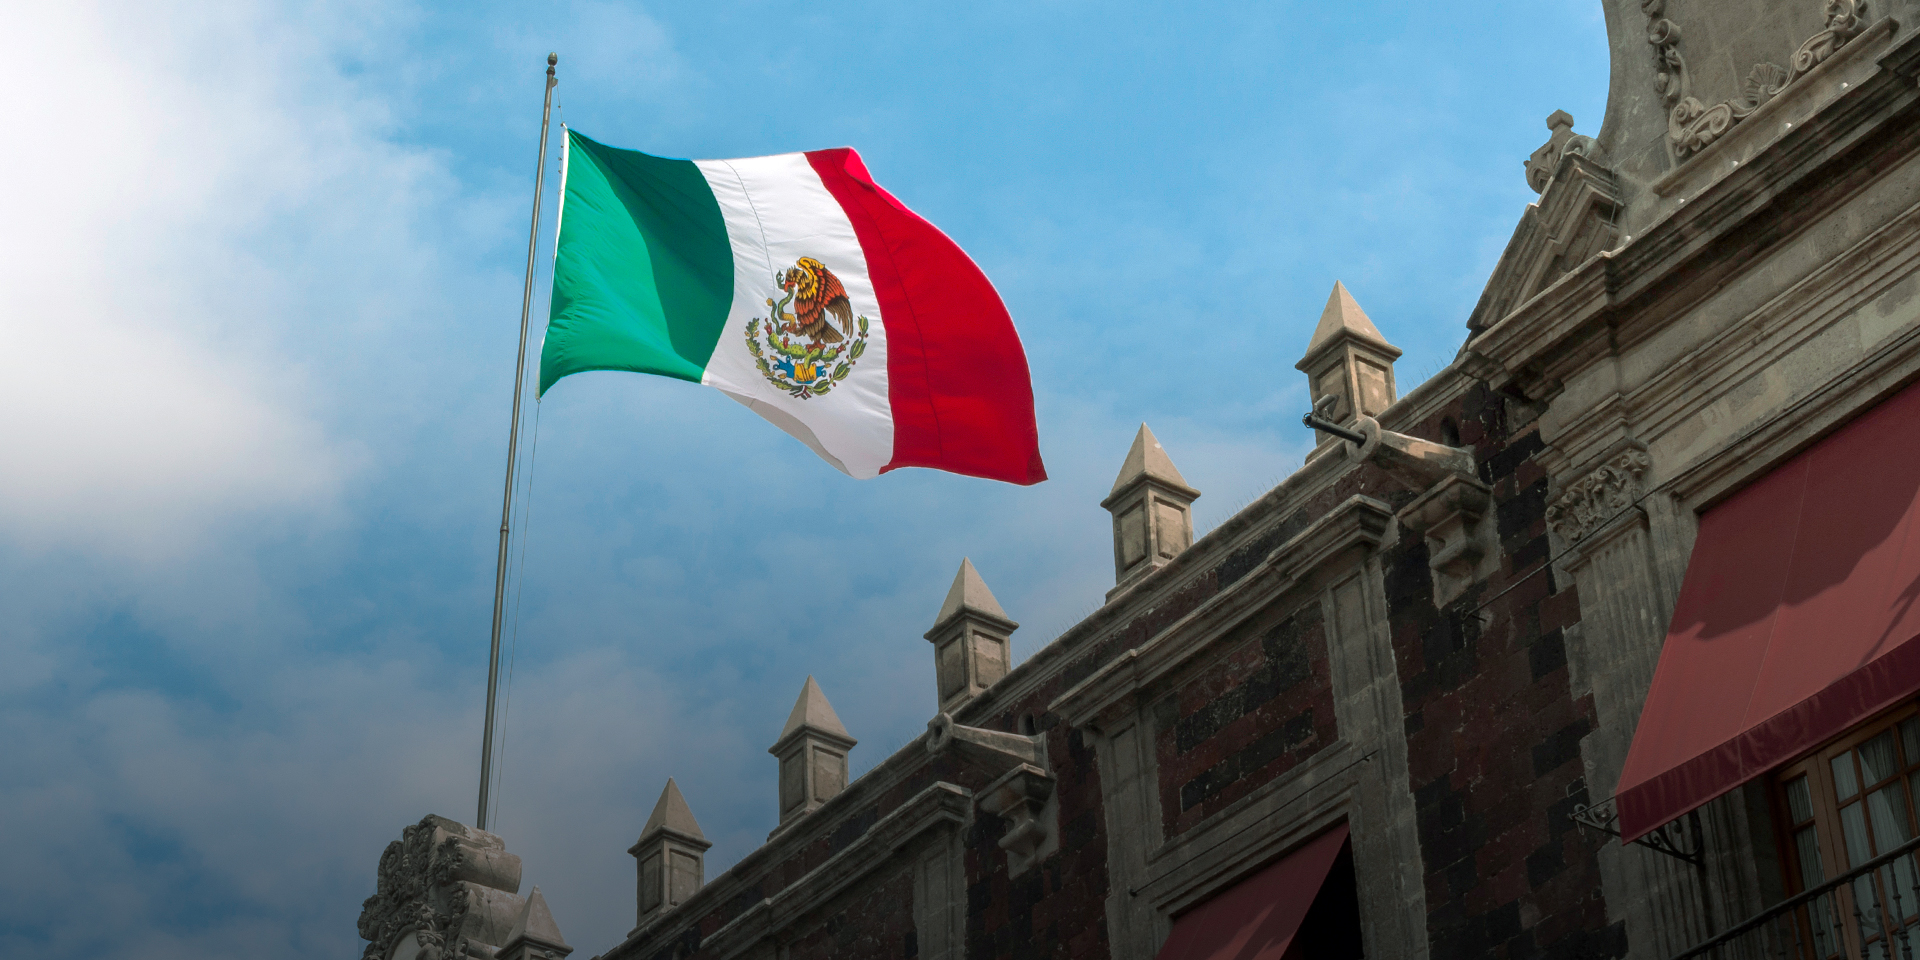 Image of the roof of a building with the Mexican flag on a flagpole waving.